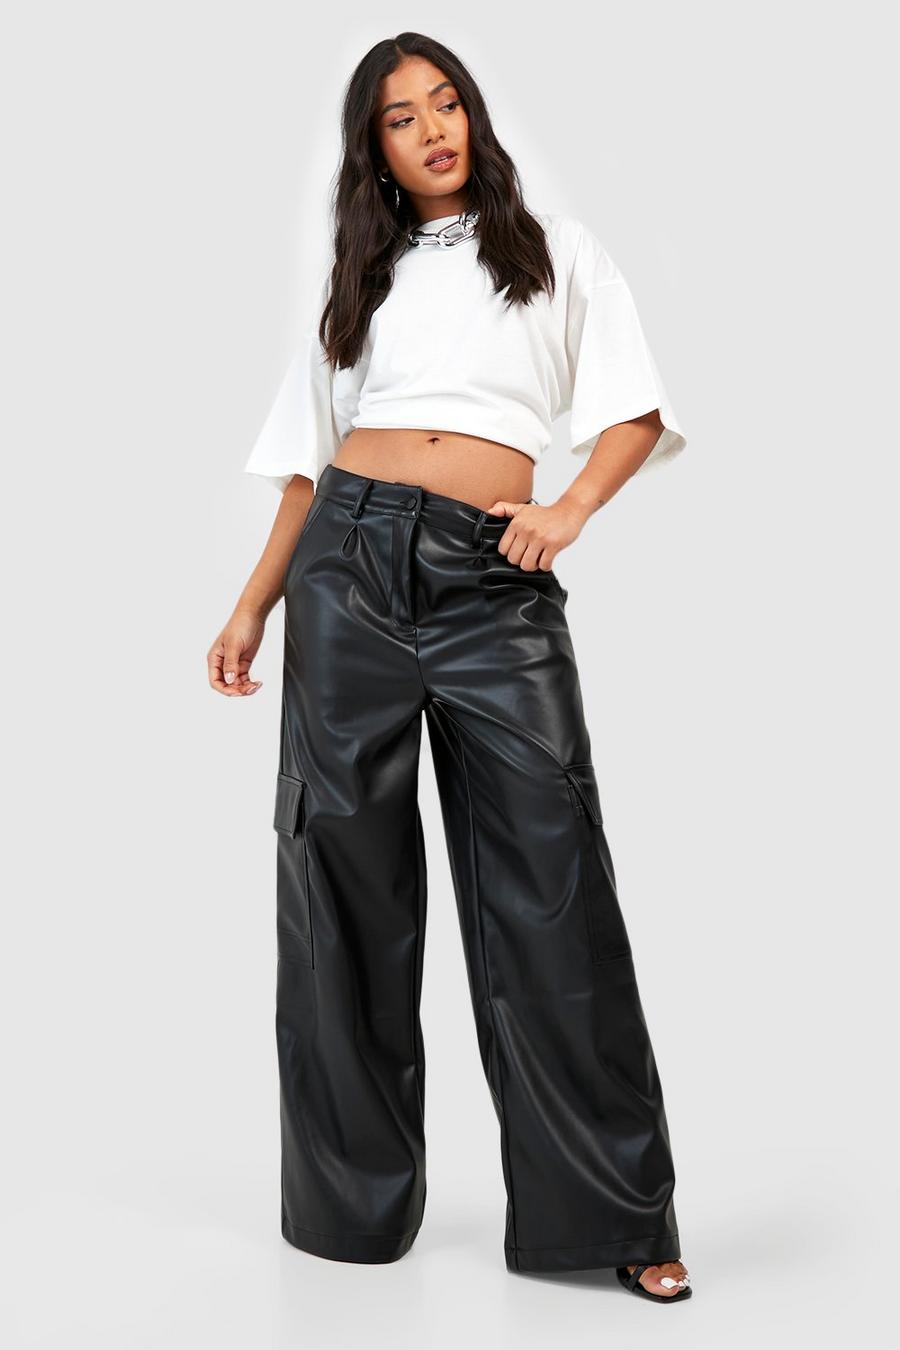 Black Petite Faux Leather High Waisted Cargo Pants